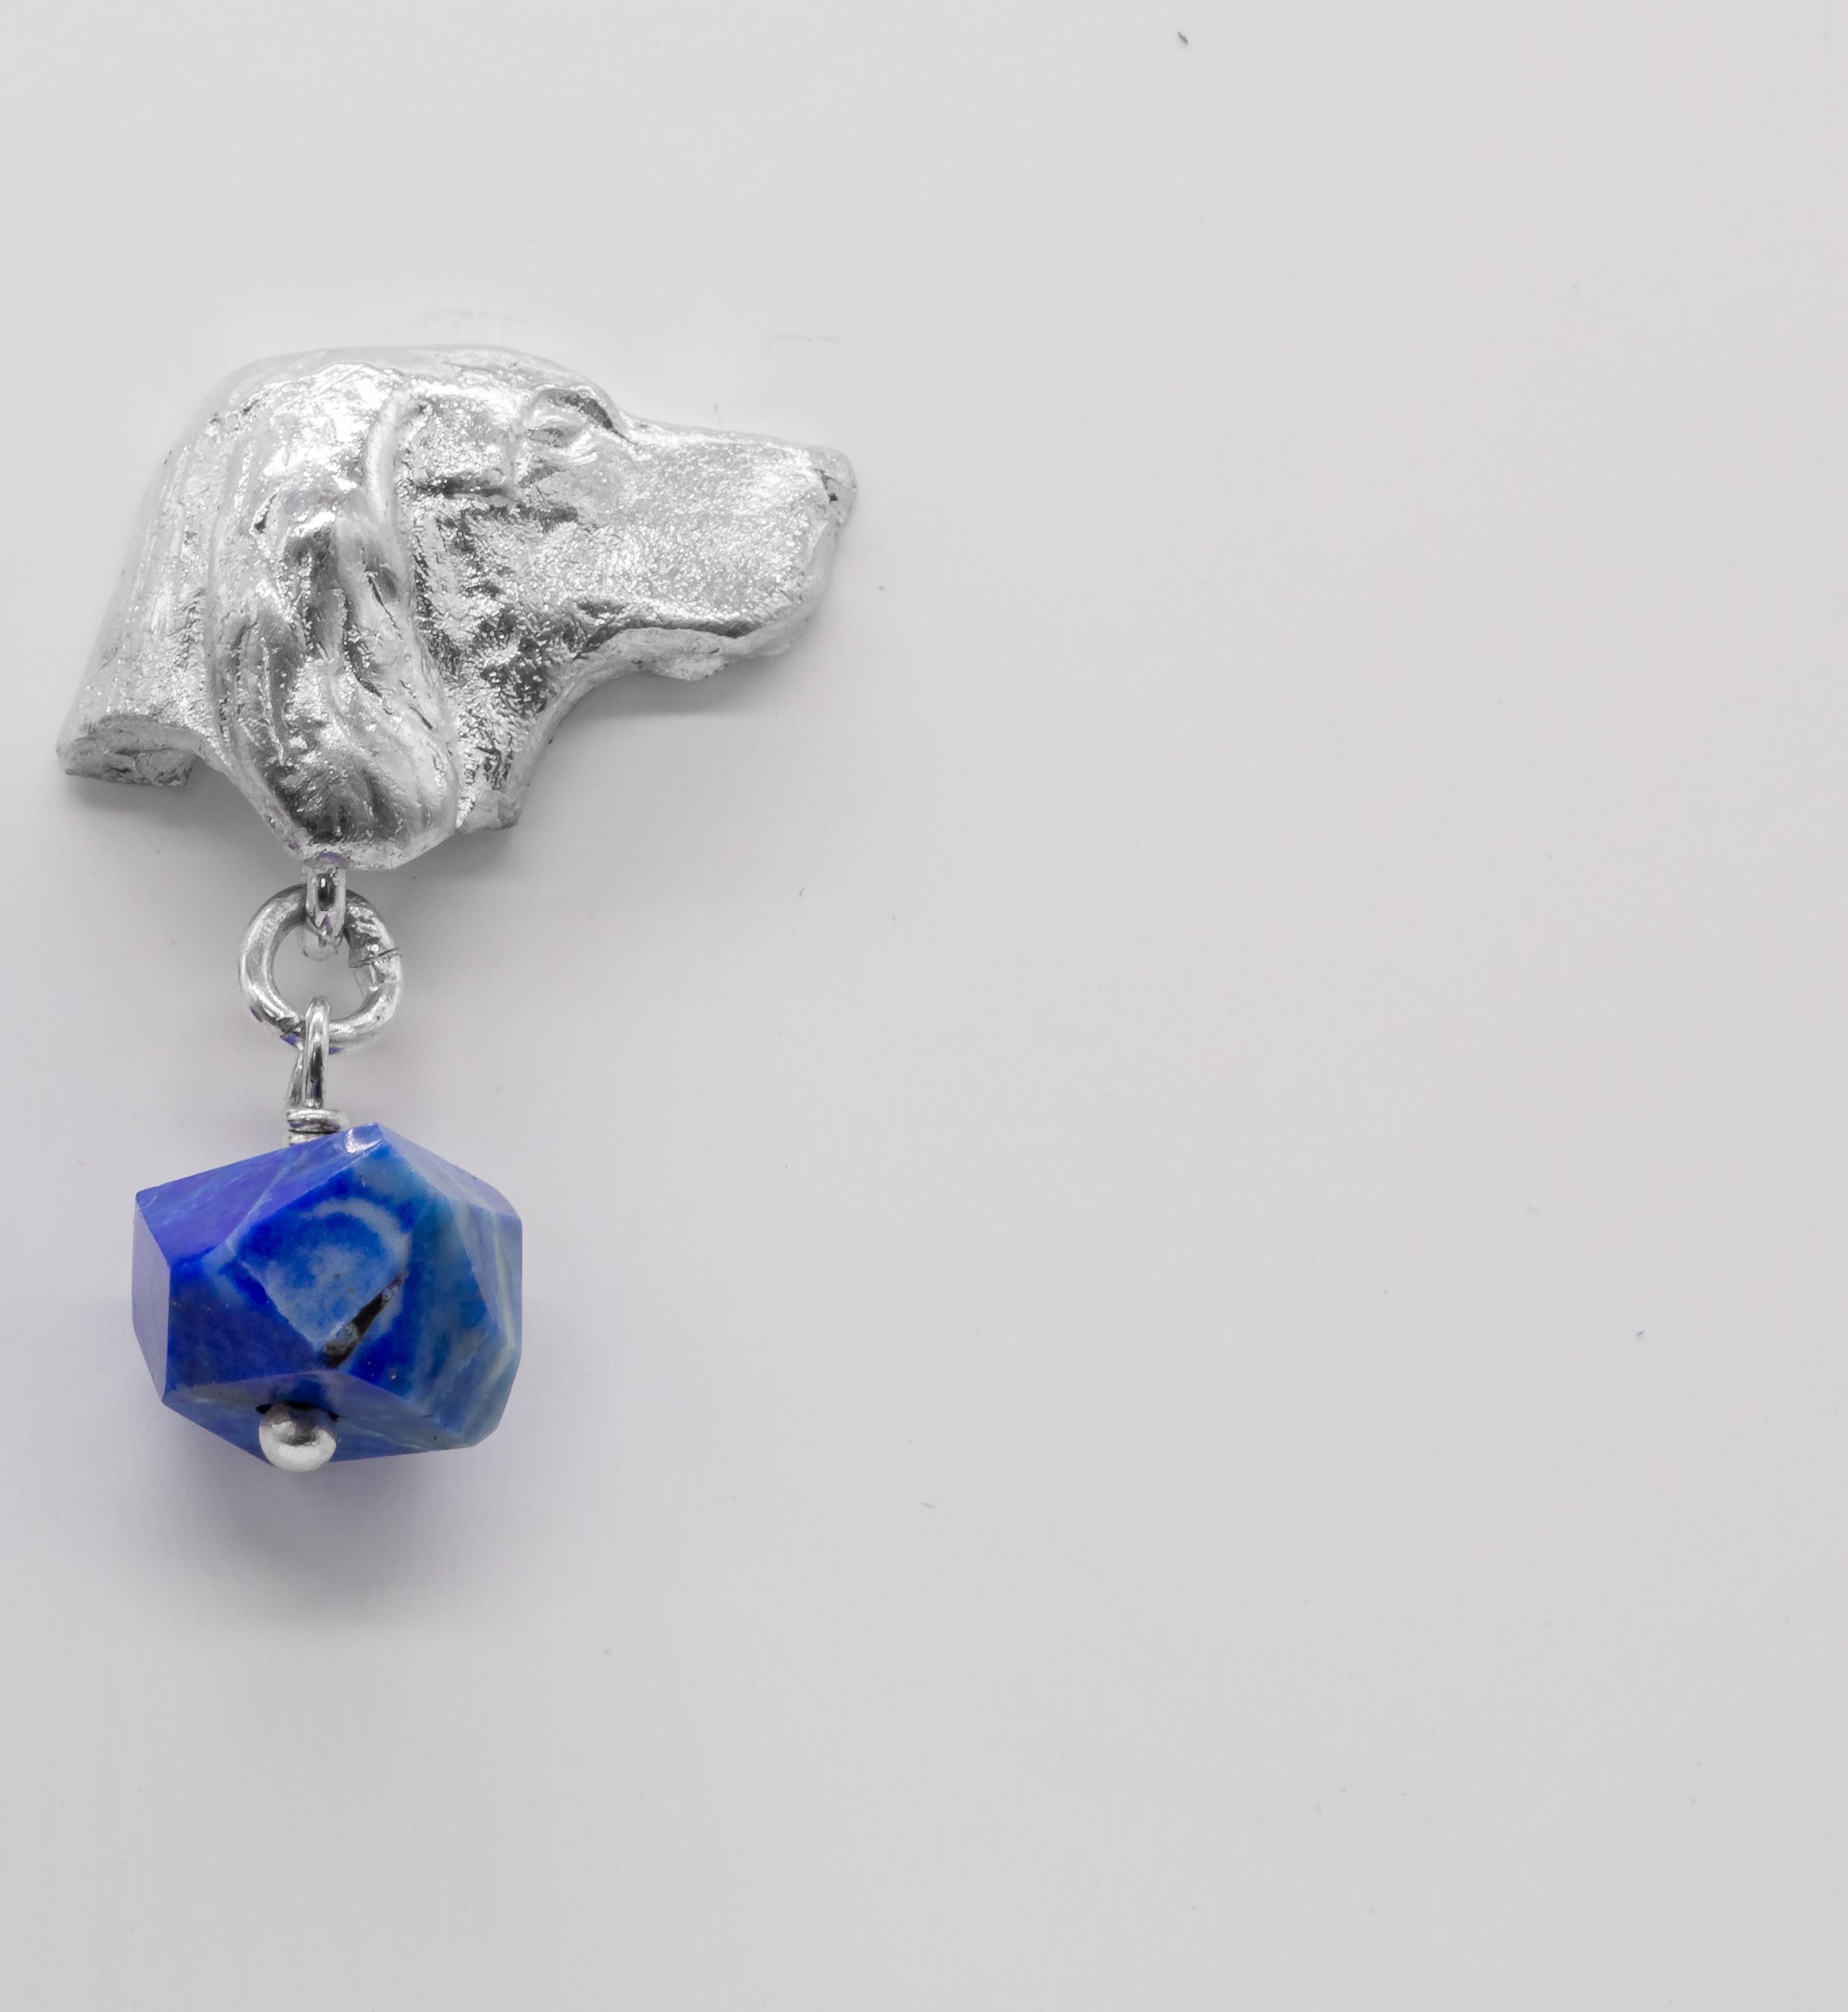 From Great Britain Paul Eaton VPRMS MAA sculpted sterling silver Spaniel dog head stud earrings with Lapis Lazuli drop (1/2